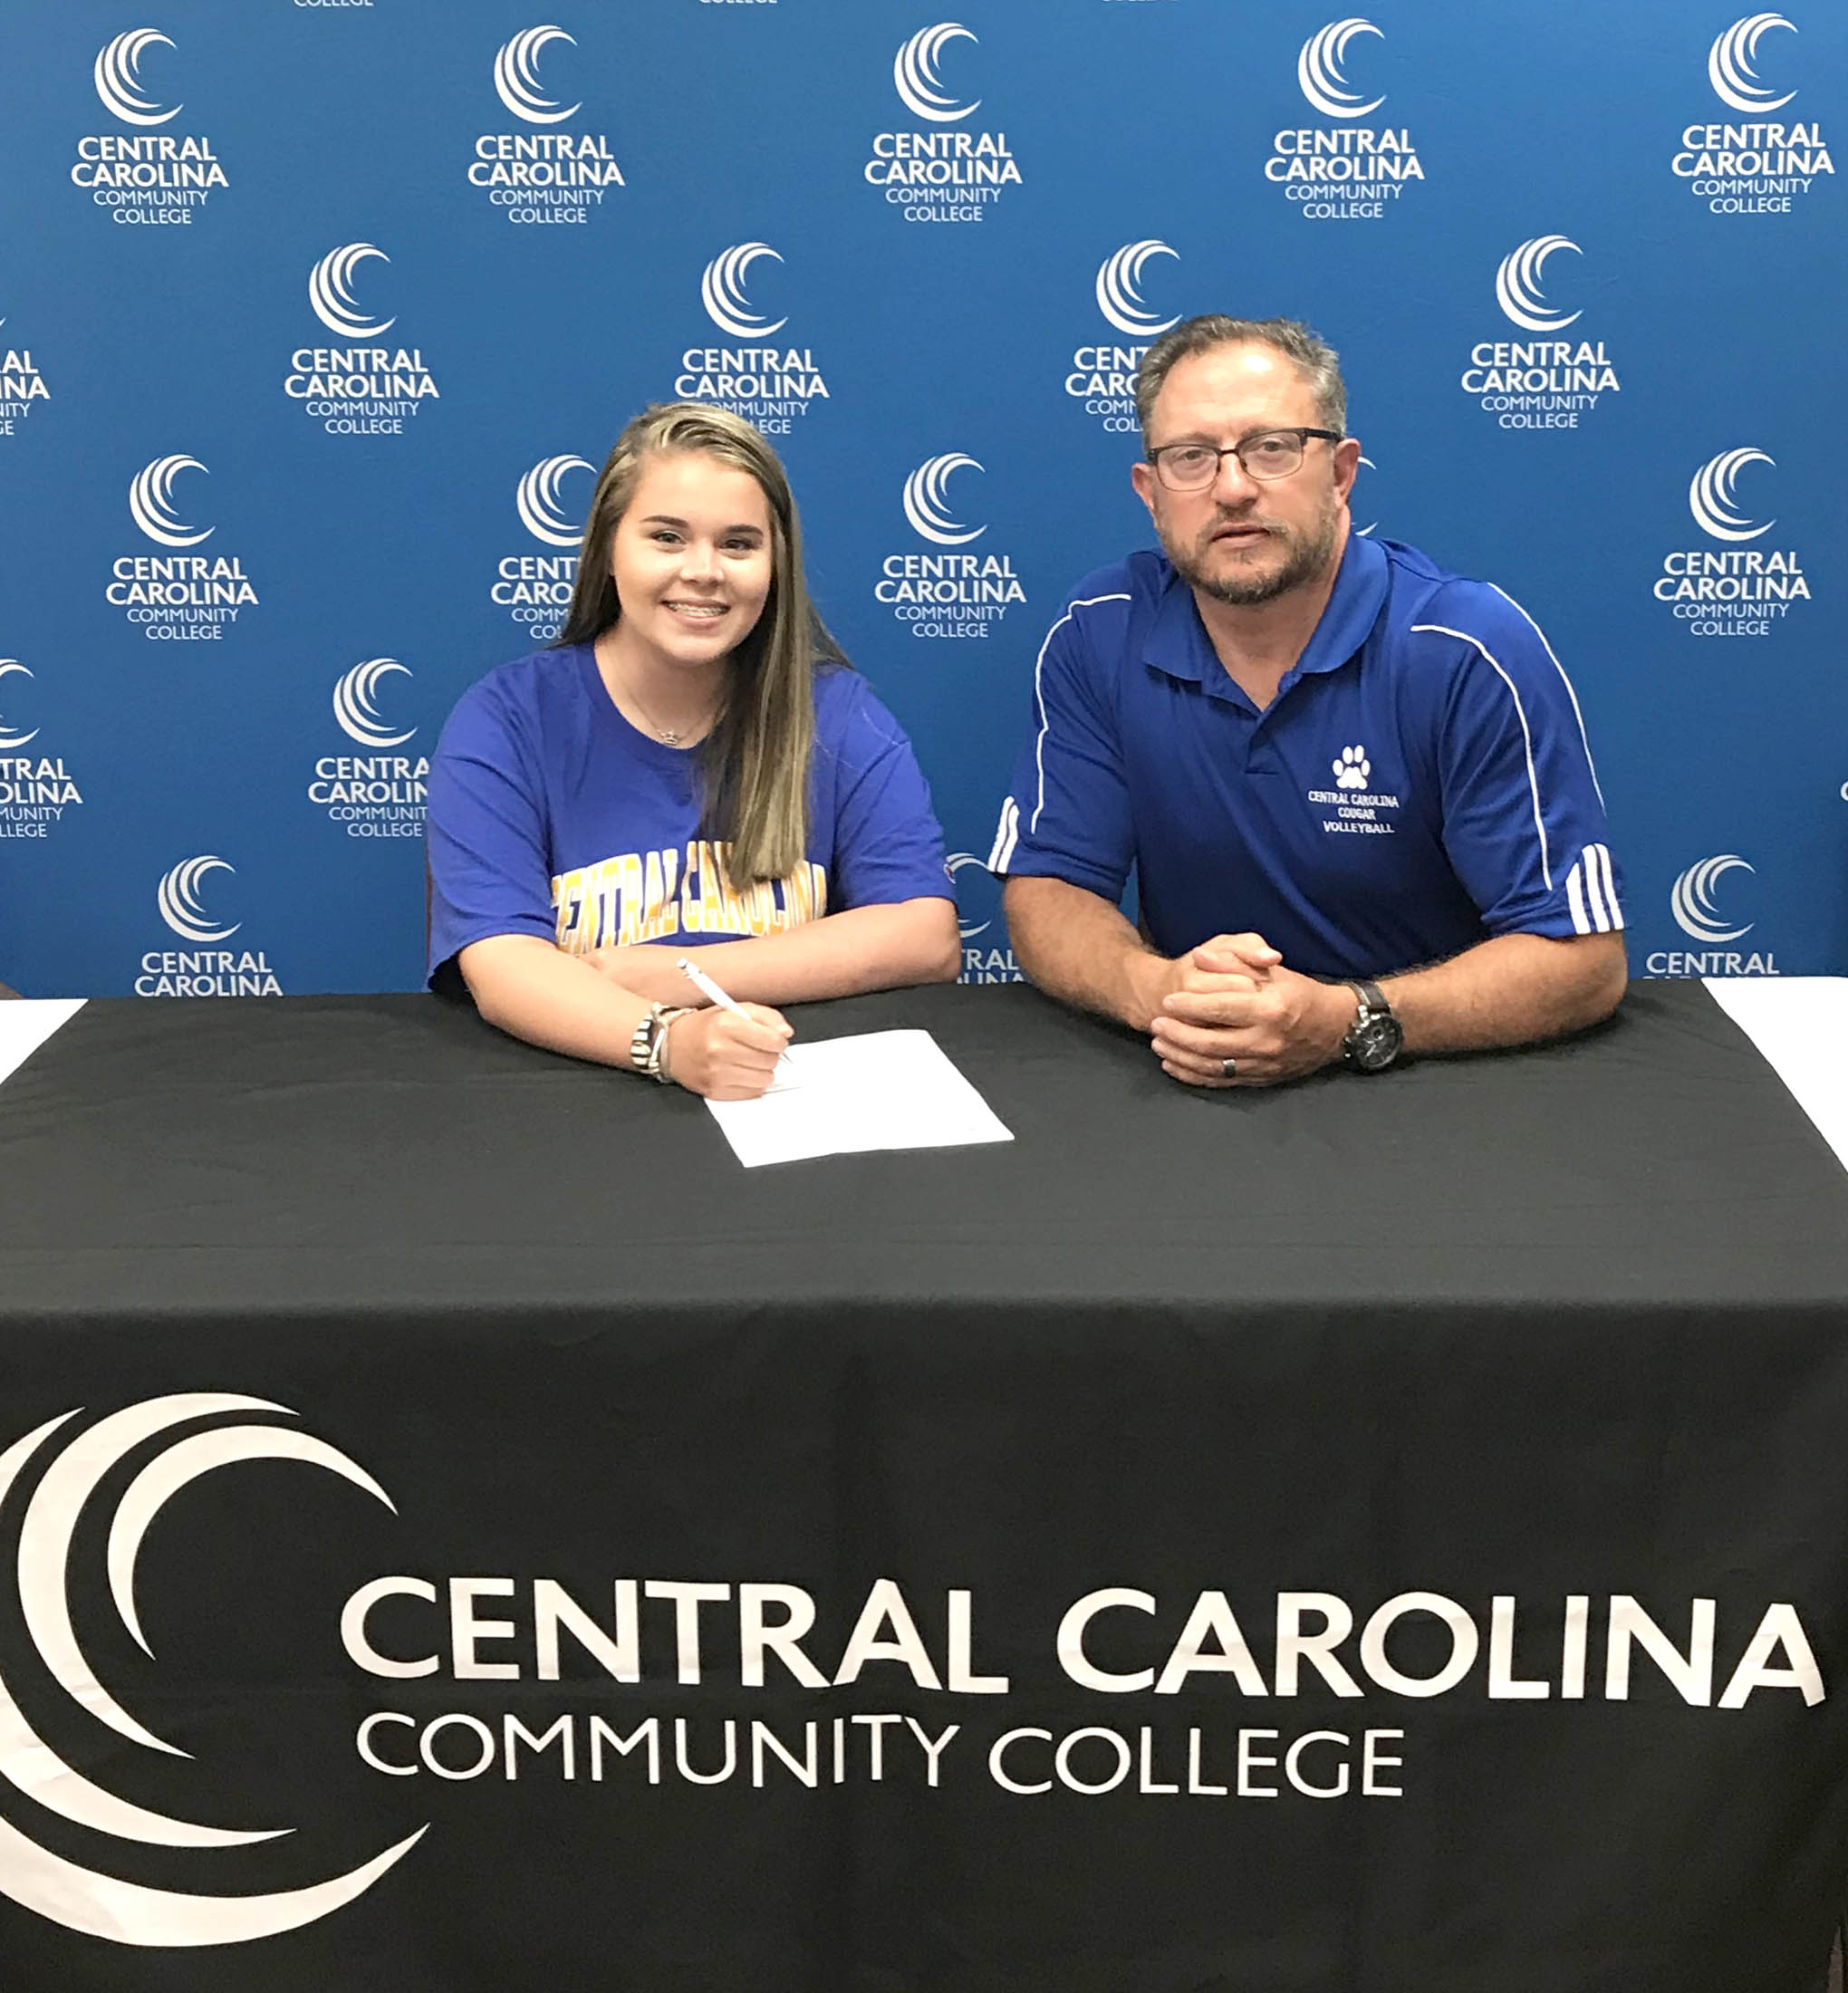 Click to enlarge,  Paige Weaver (left) signs with the Central Carolina Community College volleyball program. She is seated beside CCCC Volleyball Coach Bill Carter. For more information about Central Carolina Community College and its programs, visit its website, www.cccc.edu or call the college at 919-775-5401. 